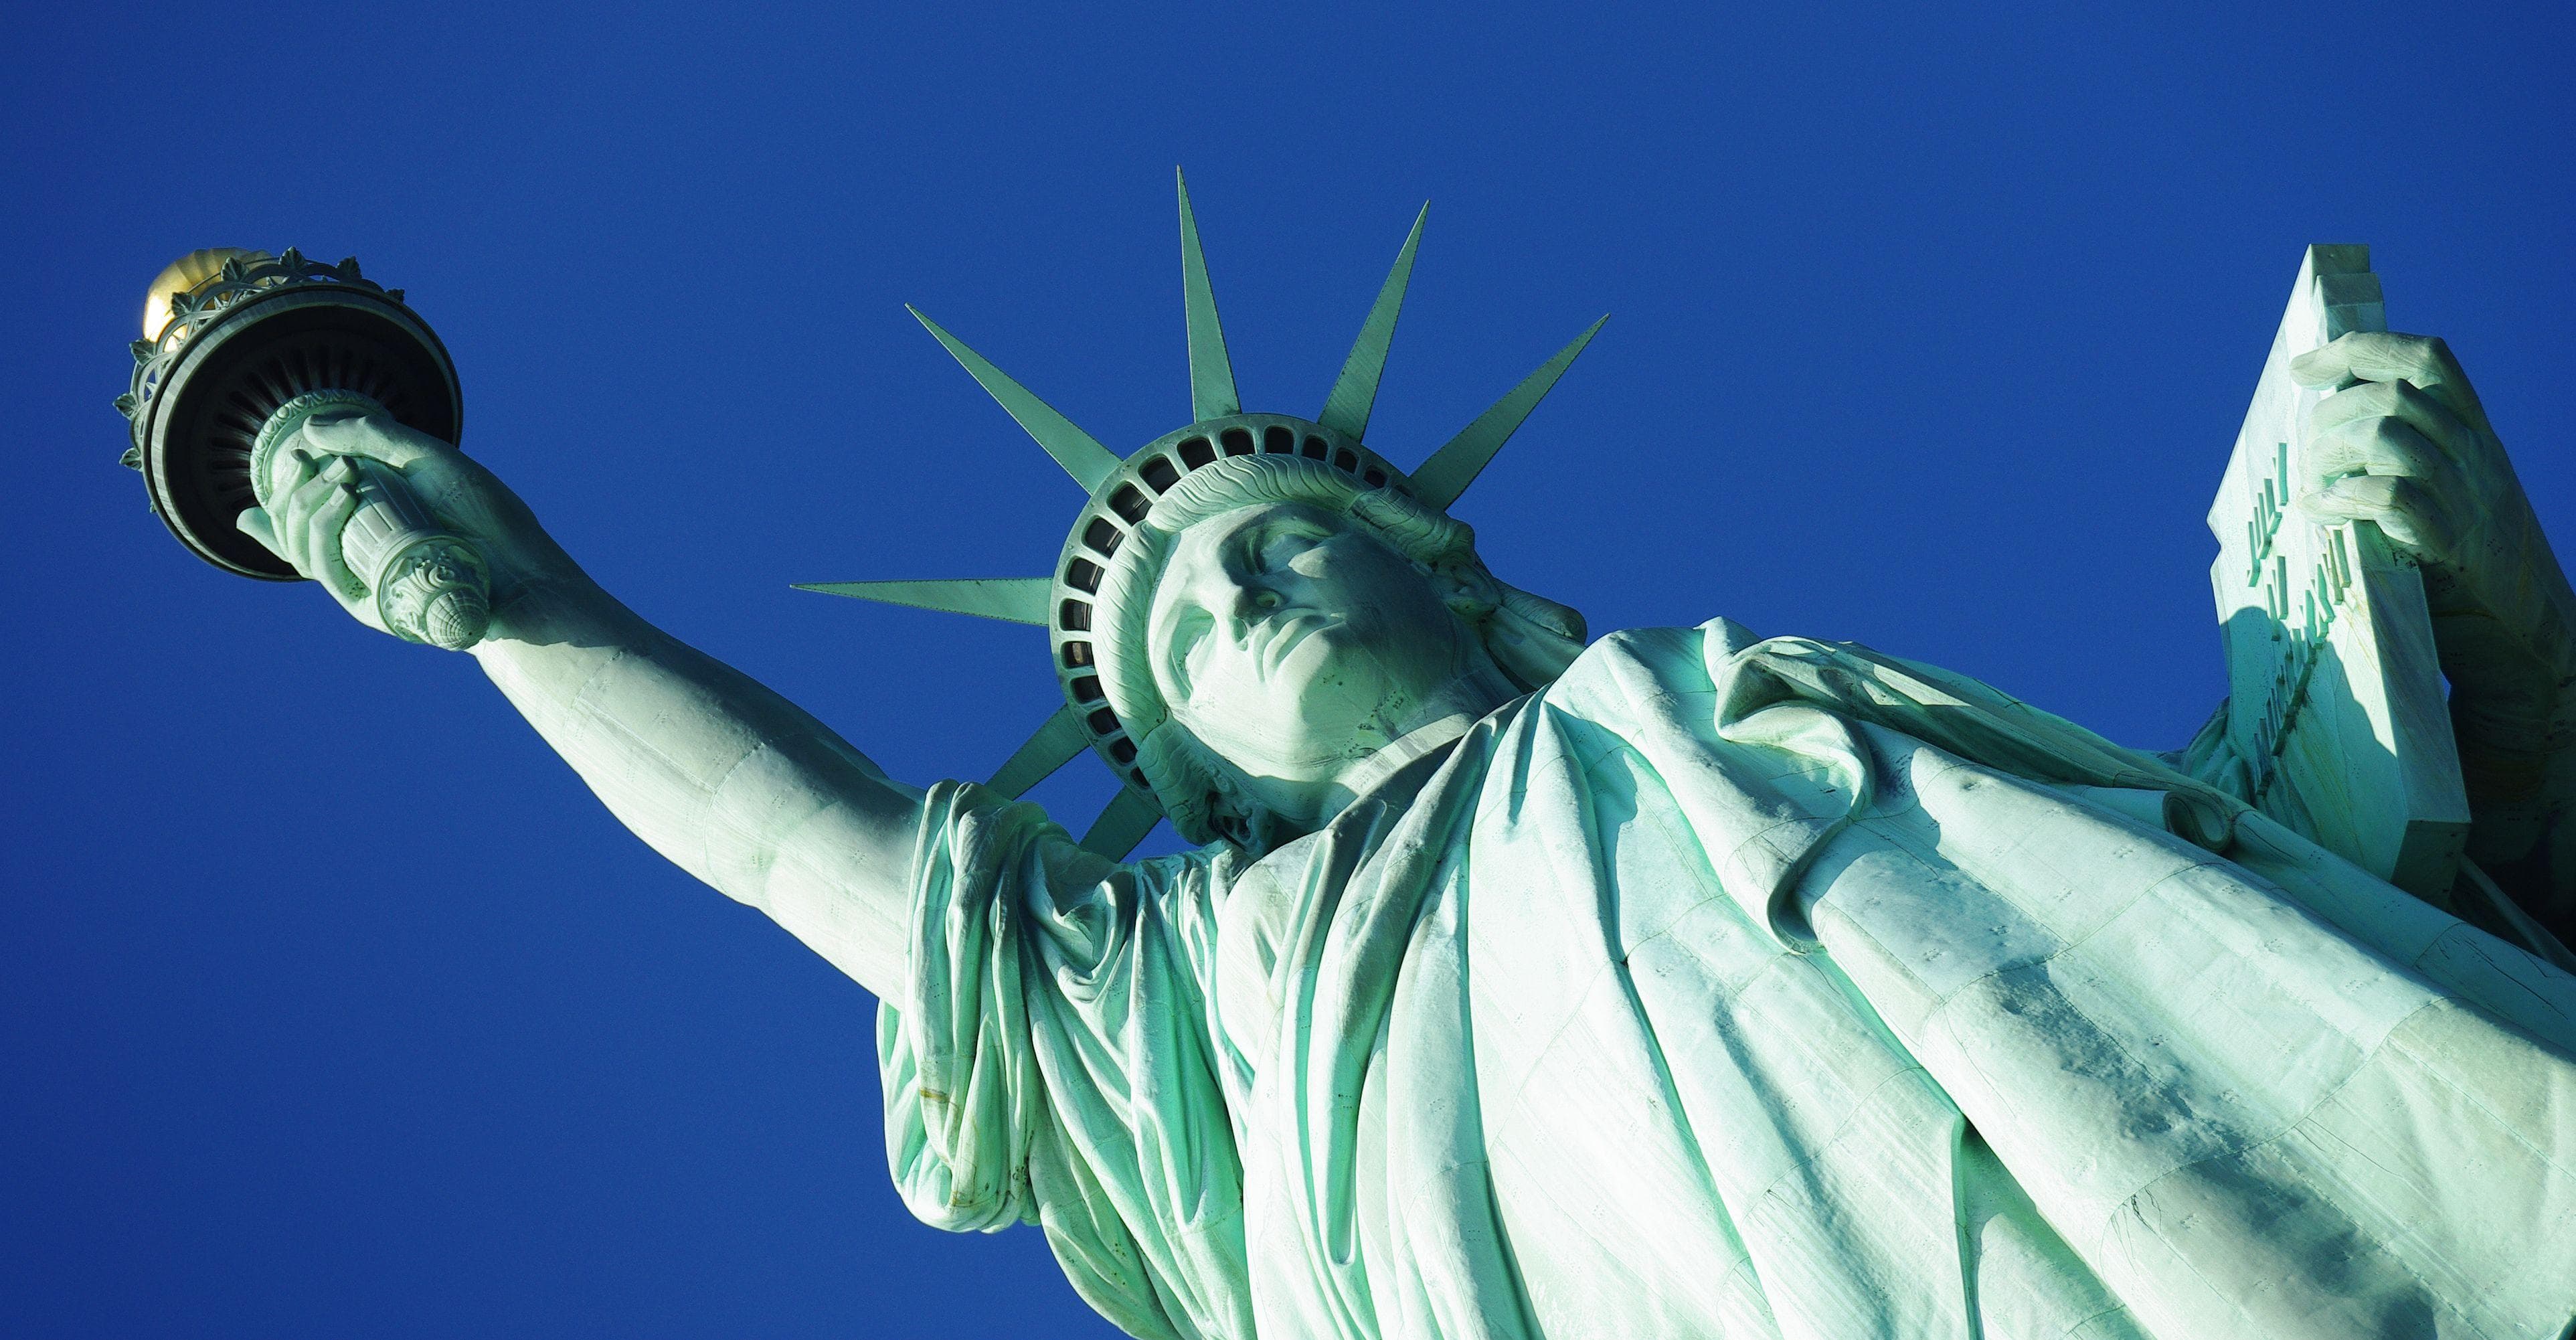 15 Statue Of Liberty Symbols And Codes Explained